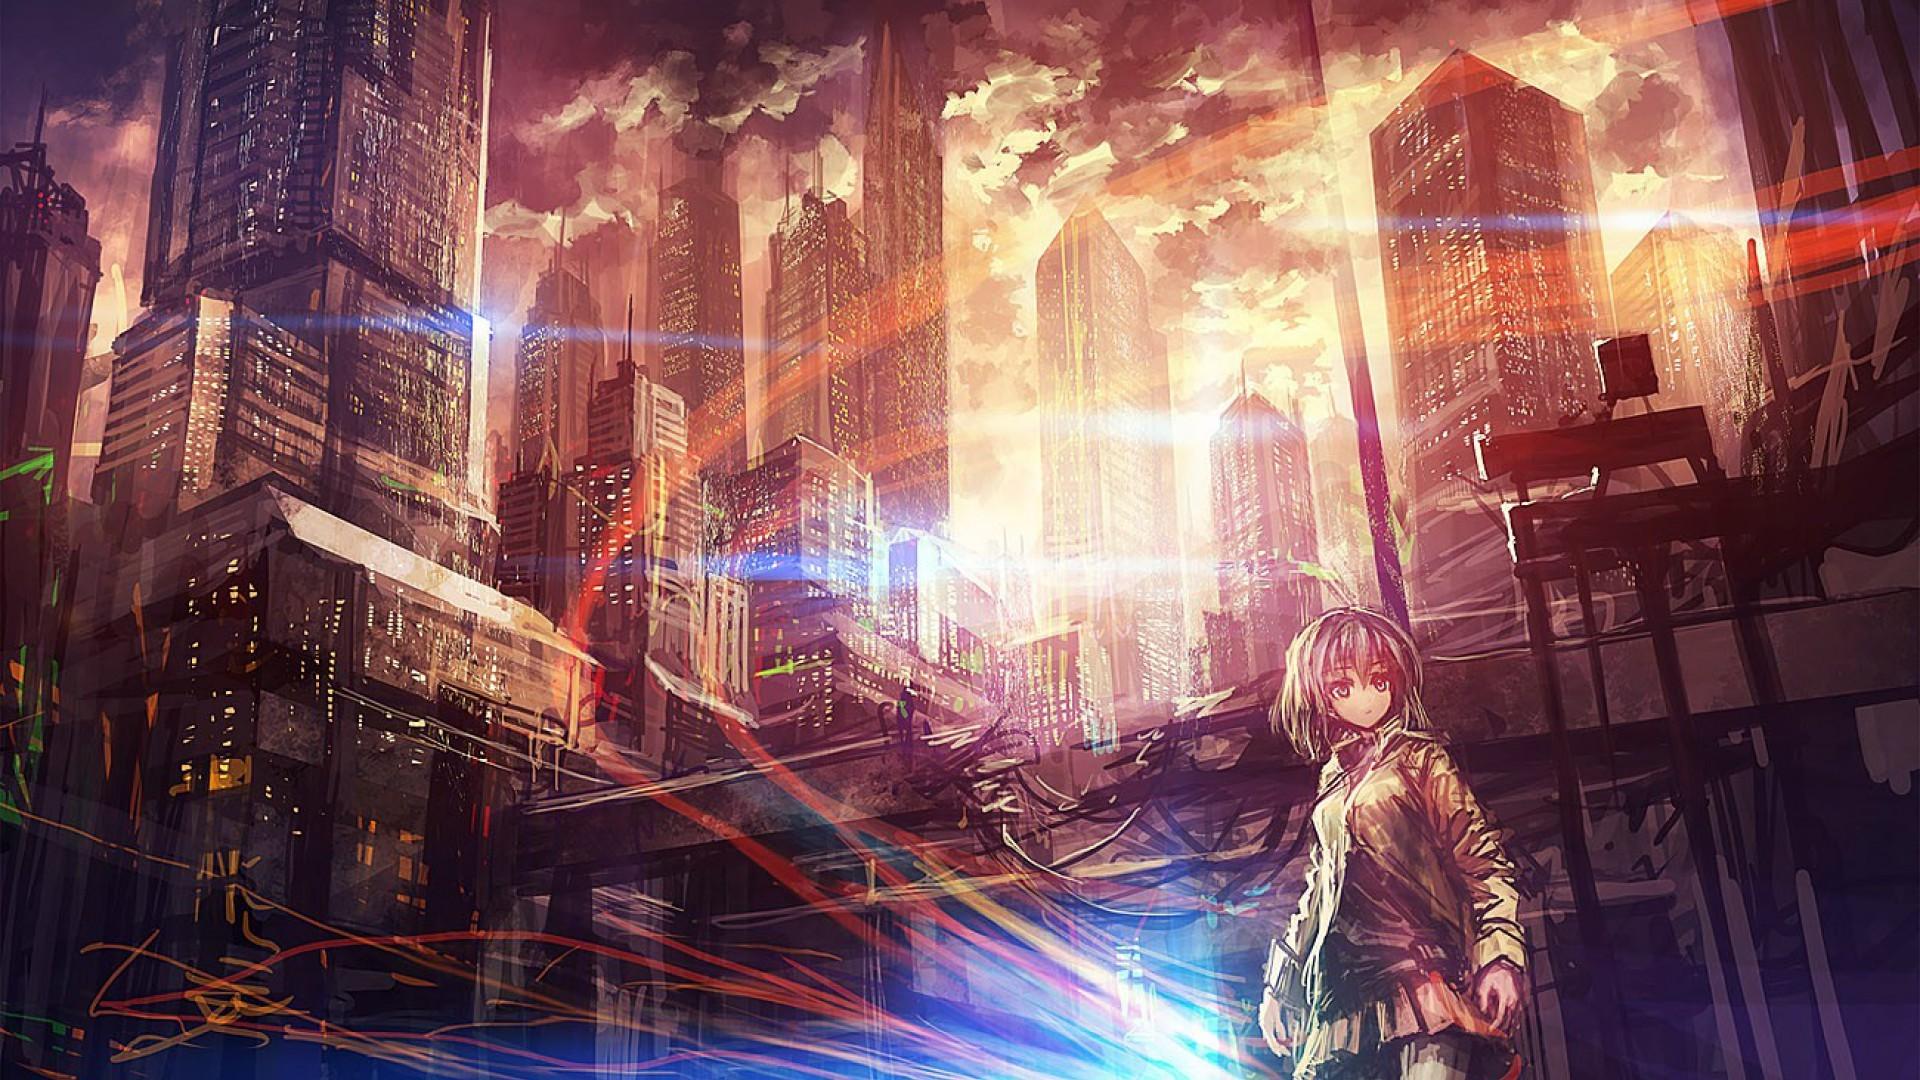 Wallpaper : anime wallpaper, anime girls, digital art, anime landscape,  Photoshop, picture in picture, piture in picture 1920x1080 - Calm - 1951275  - HD Wallpapers - WallHere